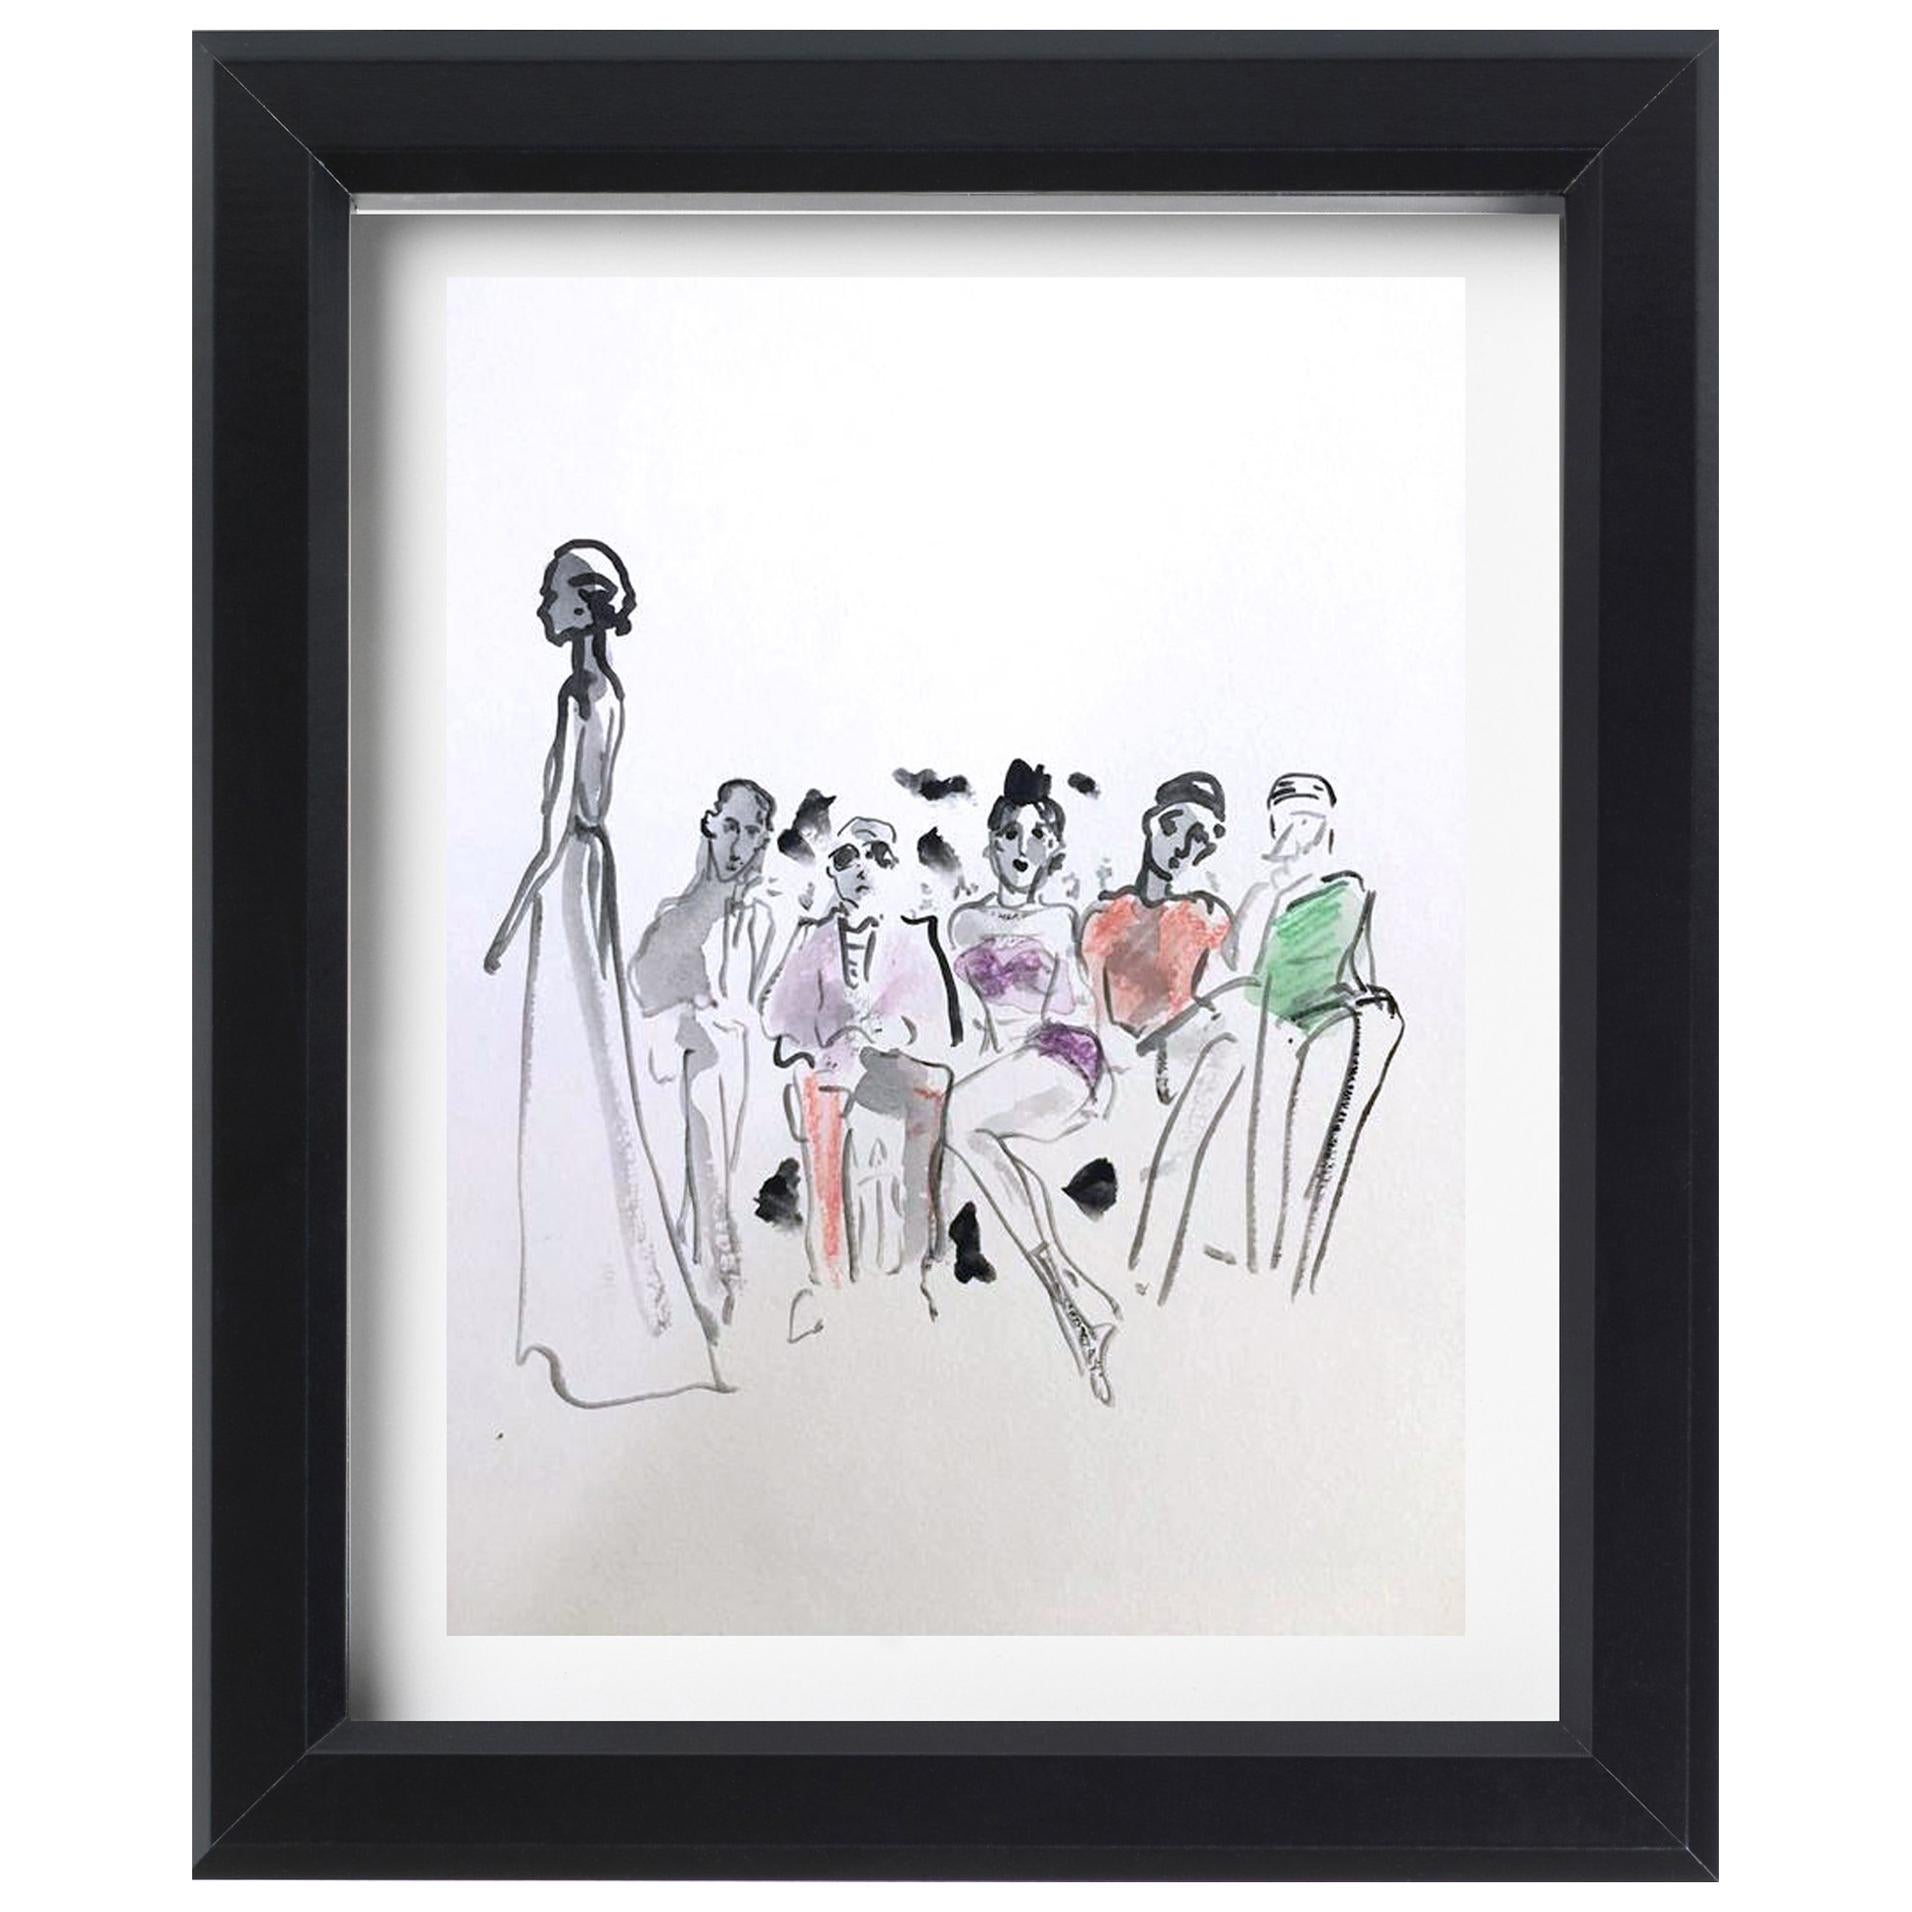 Valentino Front Row by Manuel Santelices
Dmiensions: 12 in. x 9 in.
One of a kind watercolor and oil pastel on archival paper 
Framed

Manuel Santelices explores the world of fashion, society and pop culture through his illustrations. A Chilean